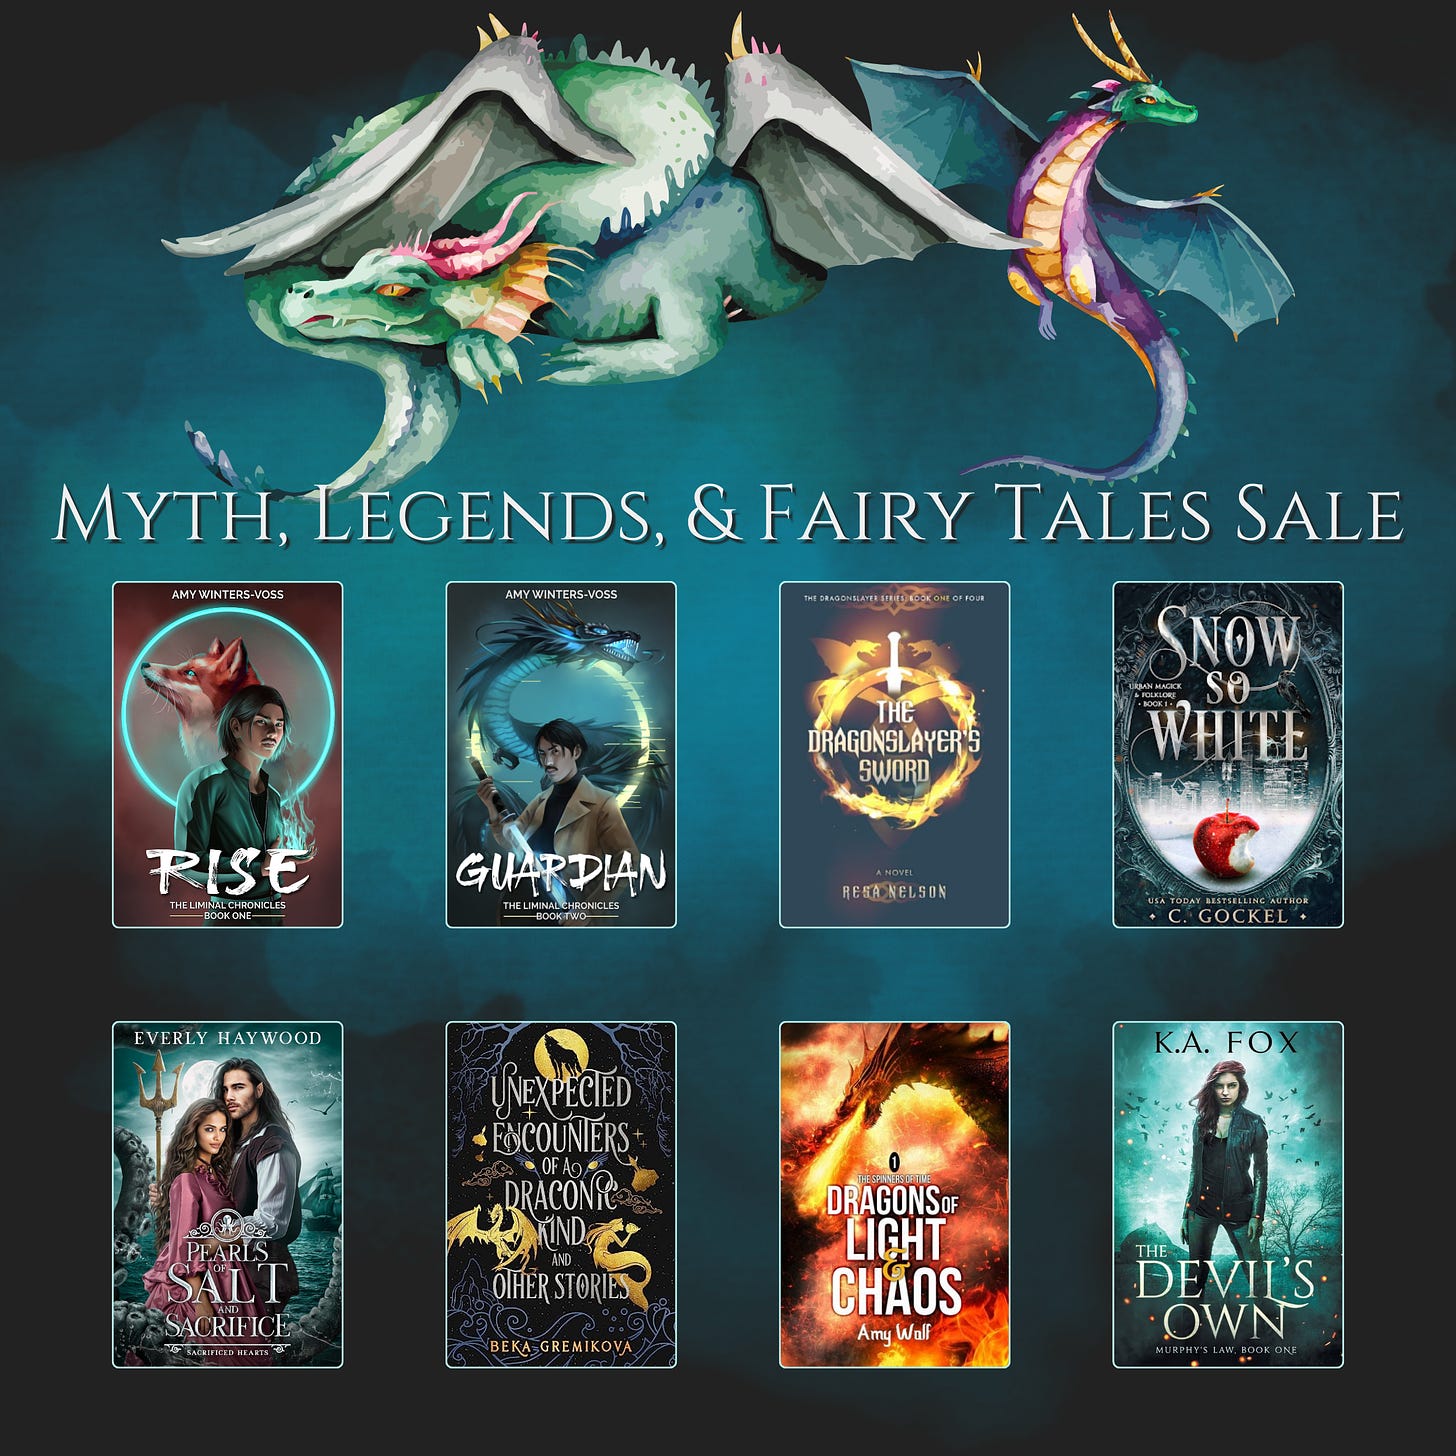 text: Myth, legend, and fairy tales sale image: two dragons above text and rows of brightly colored fantasy book covers including: Rise, Guardian, The Dragonslayer's Sword, Snow so White, Peals of Salt and Sacrifice, Unexpected Encounters with Draconic Kind and Other Stories, Dragons of Light and Chaos, and The Devil's Own